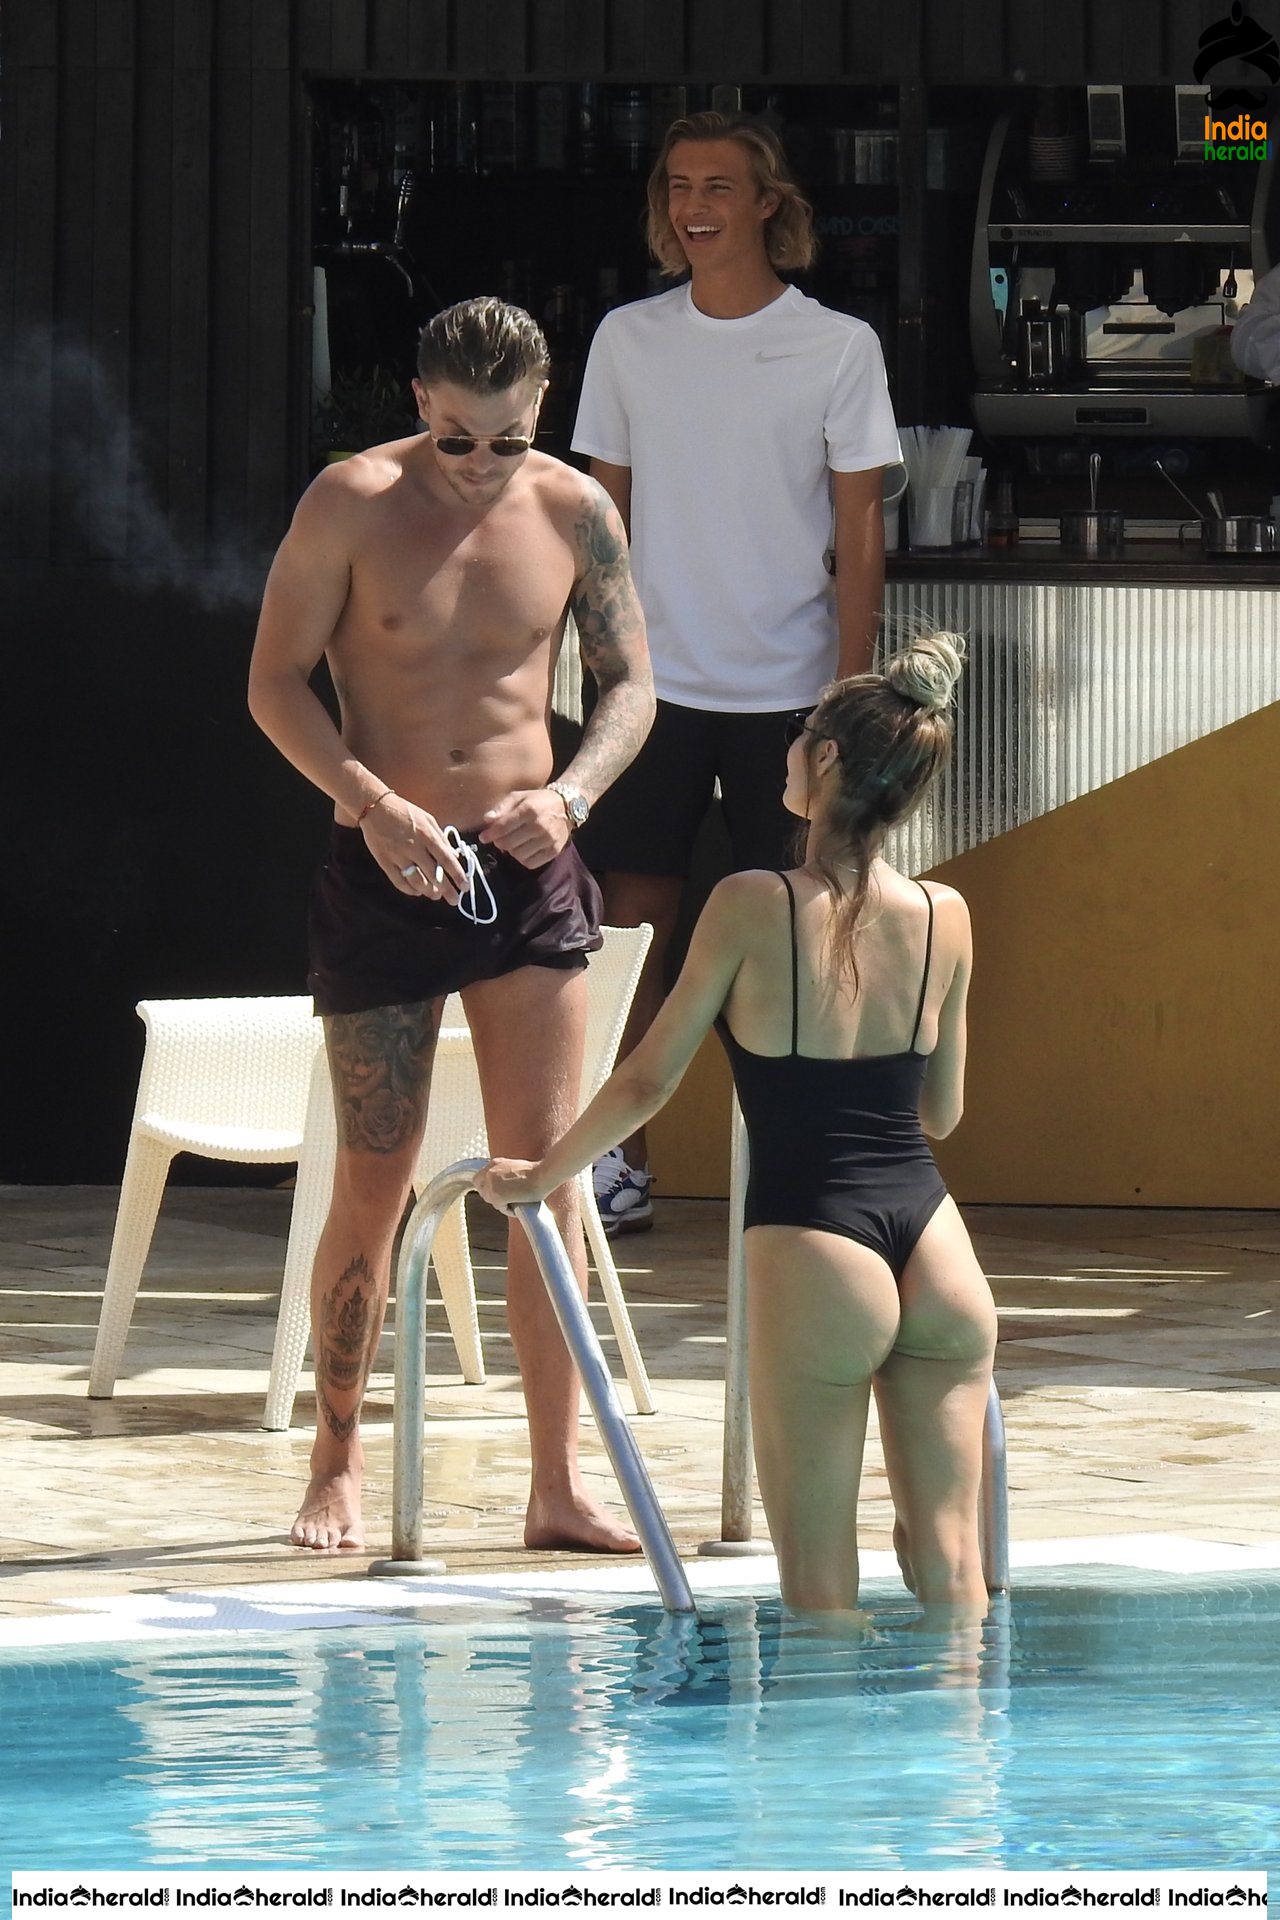 Chloe Spotted in Bikini with her Boyfriend at a Hotel in Encino